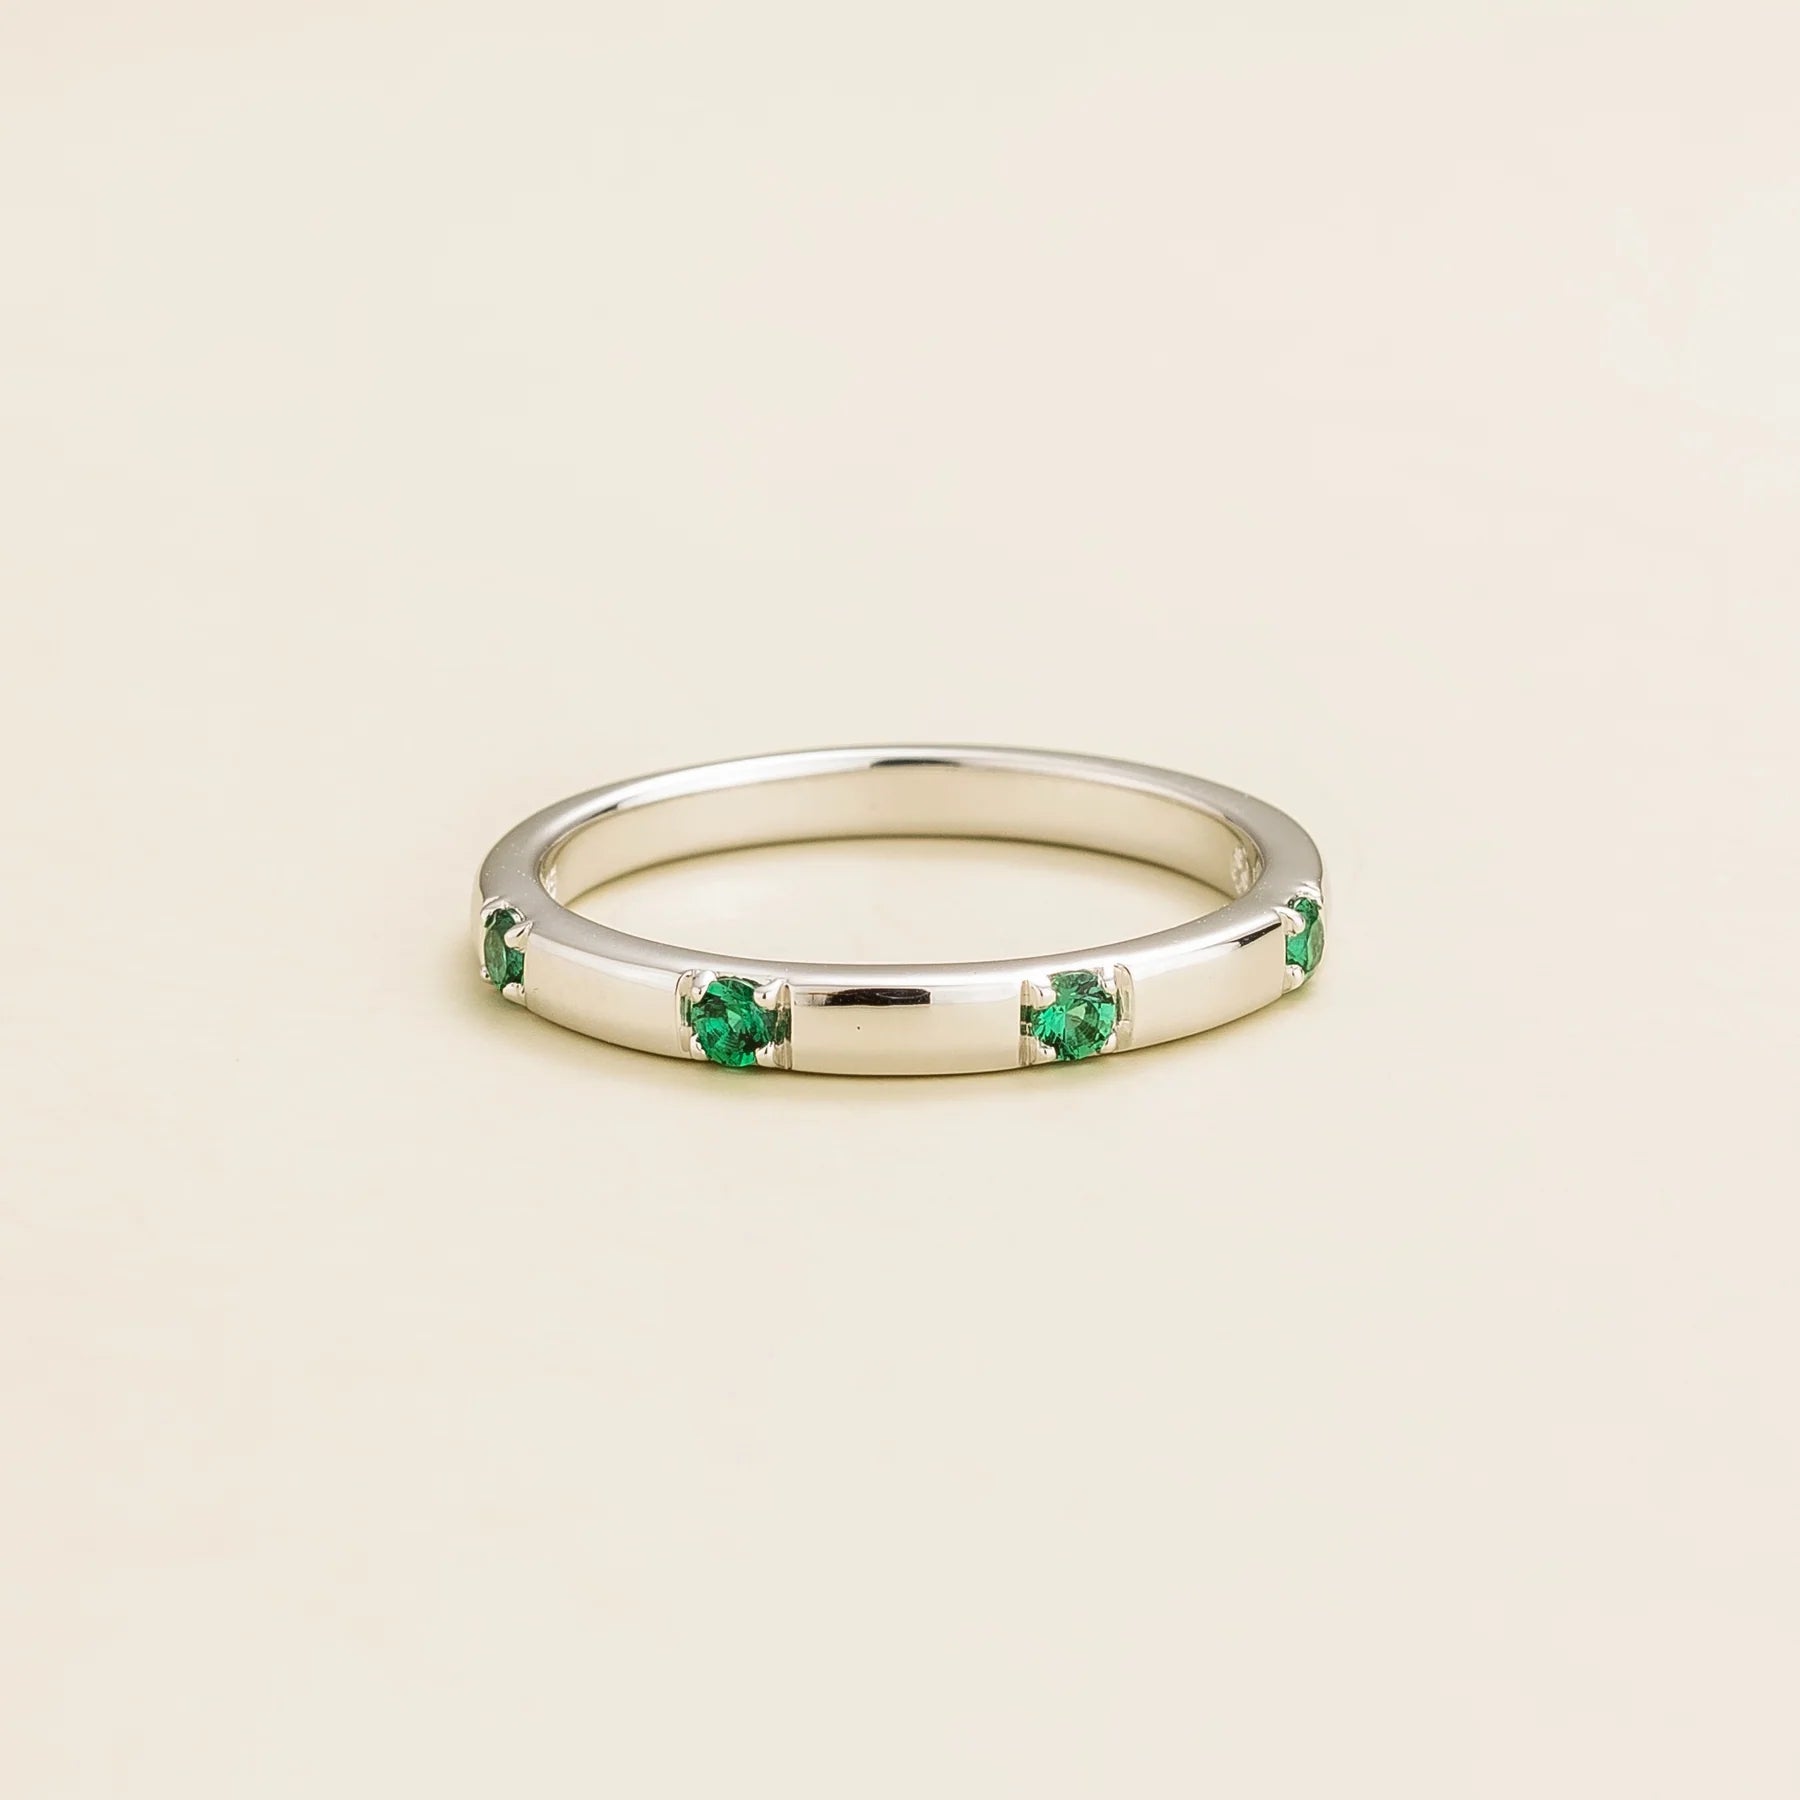 Balans White Gold Ring Set With Emerald By Juvetti Online Jewellery London